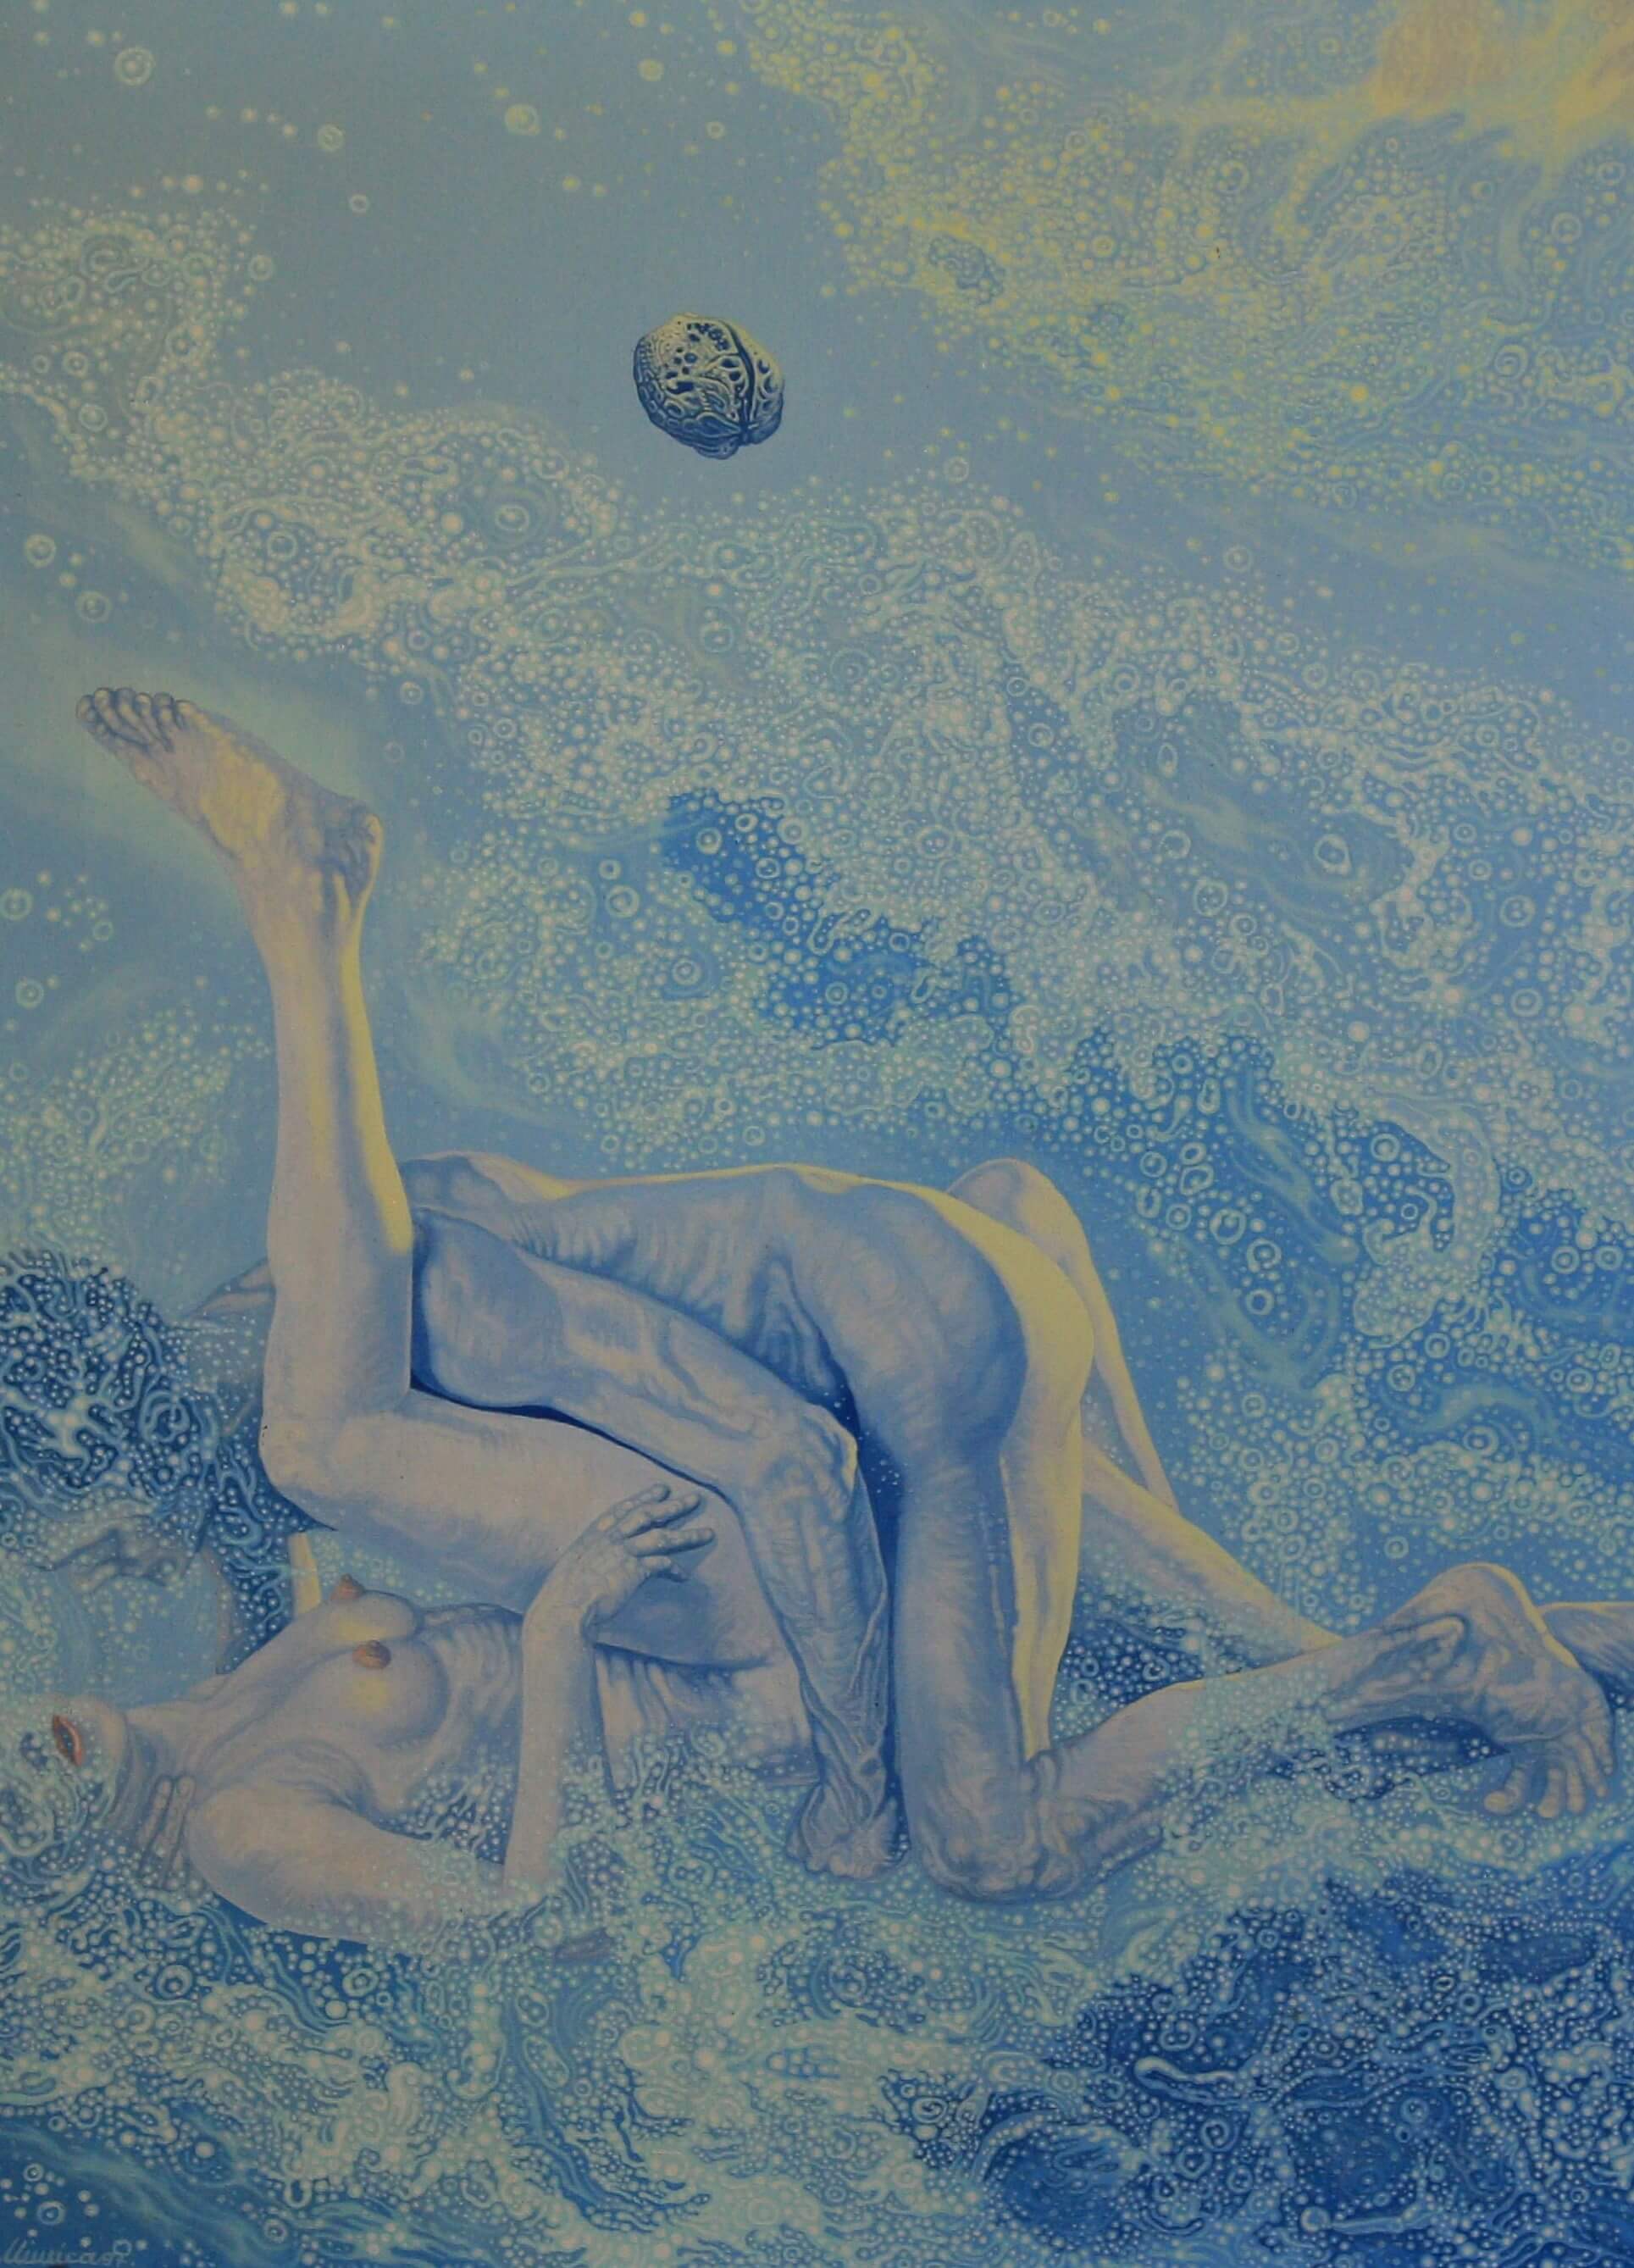 Oil on canvas painting by the artist Mimica Kulenovic, portraying an underwater intercourse.